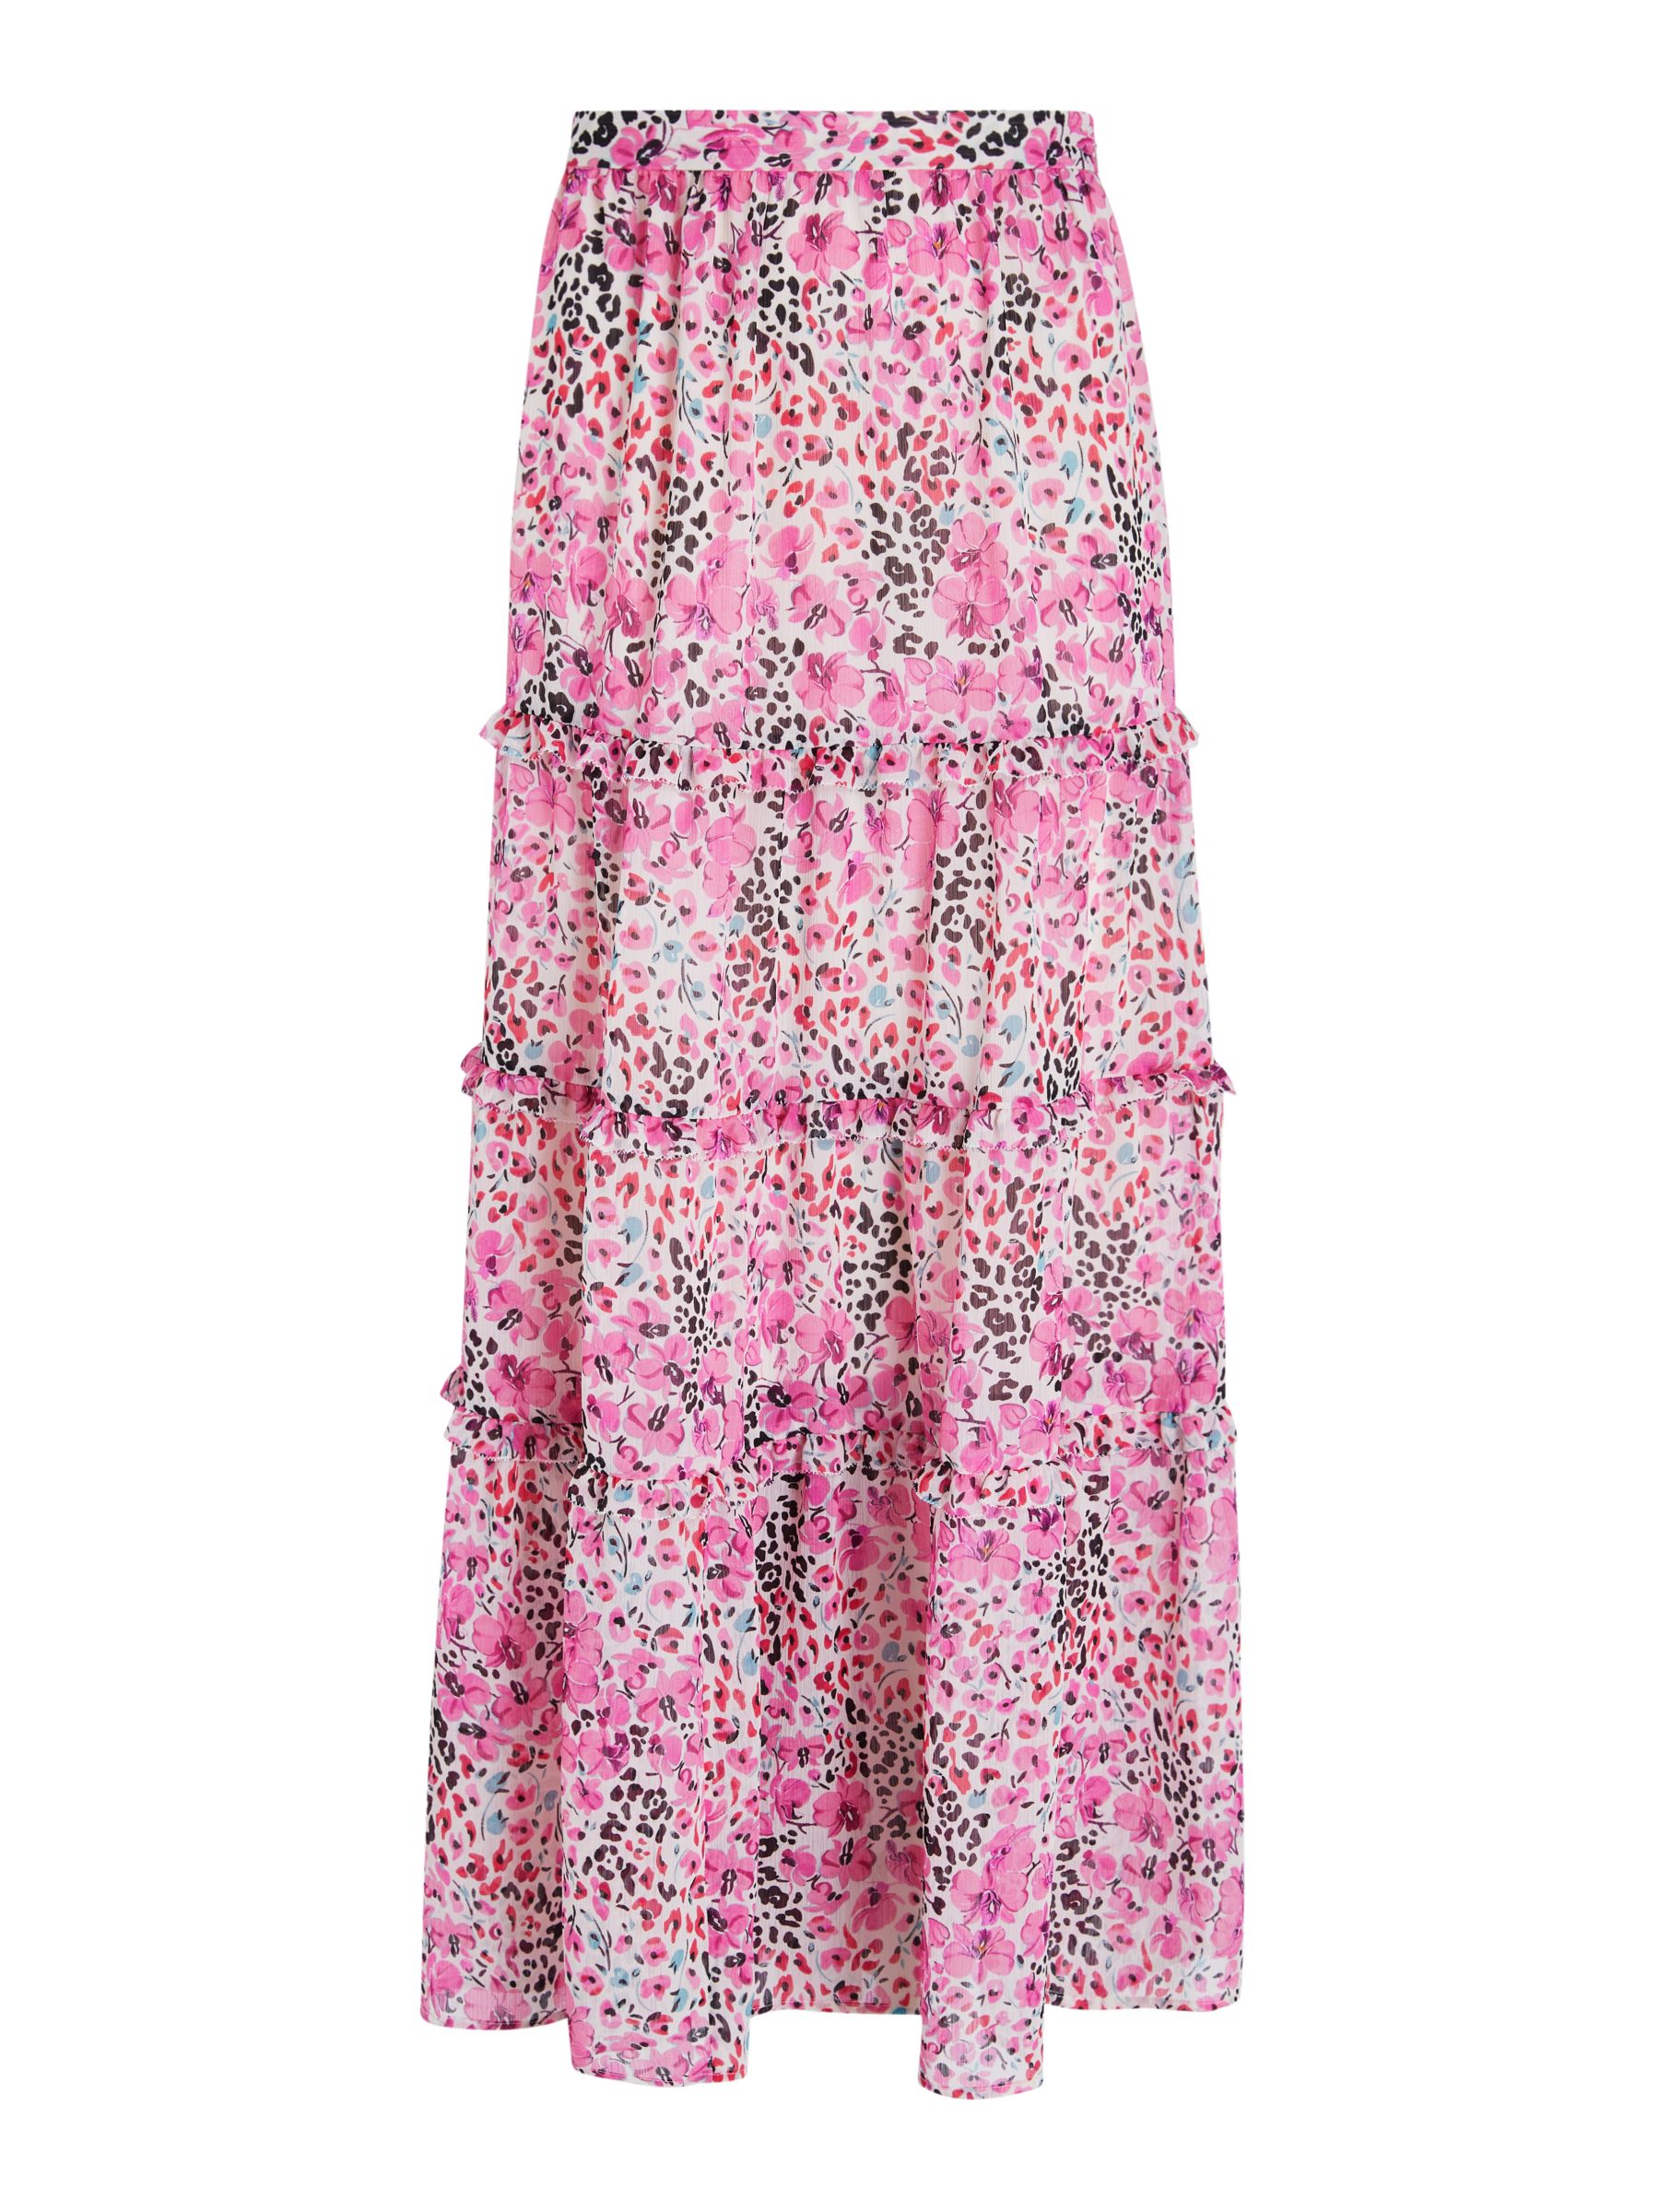 Somerset by Alice Temperley Orchid Animal Print Tiered Midi Skirt, Pink ...